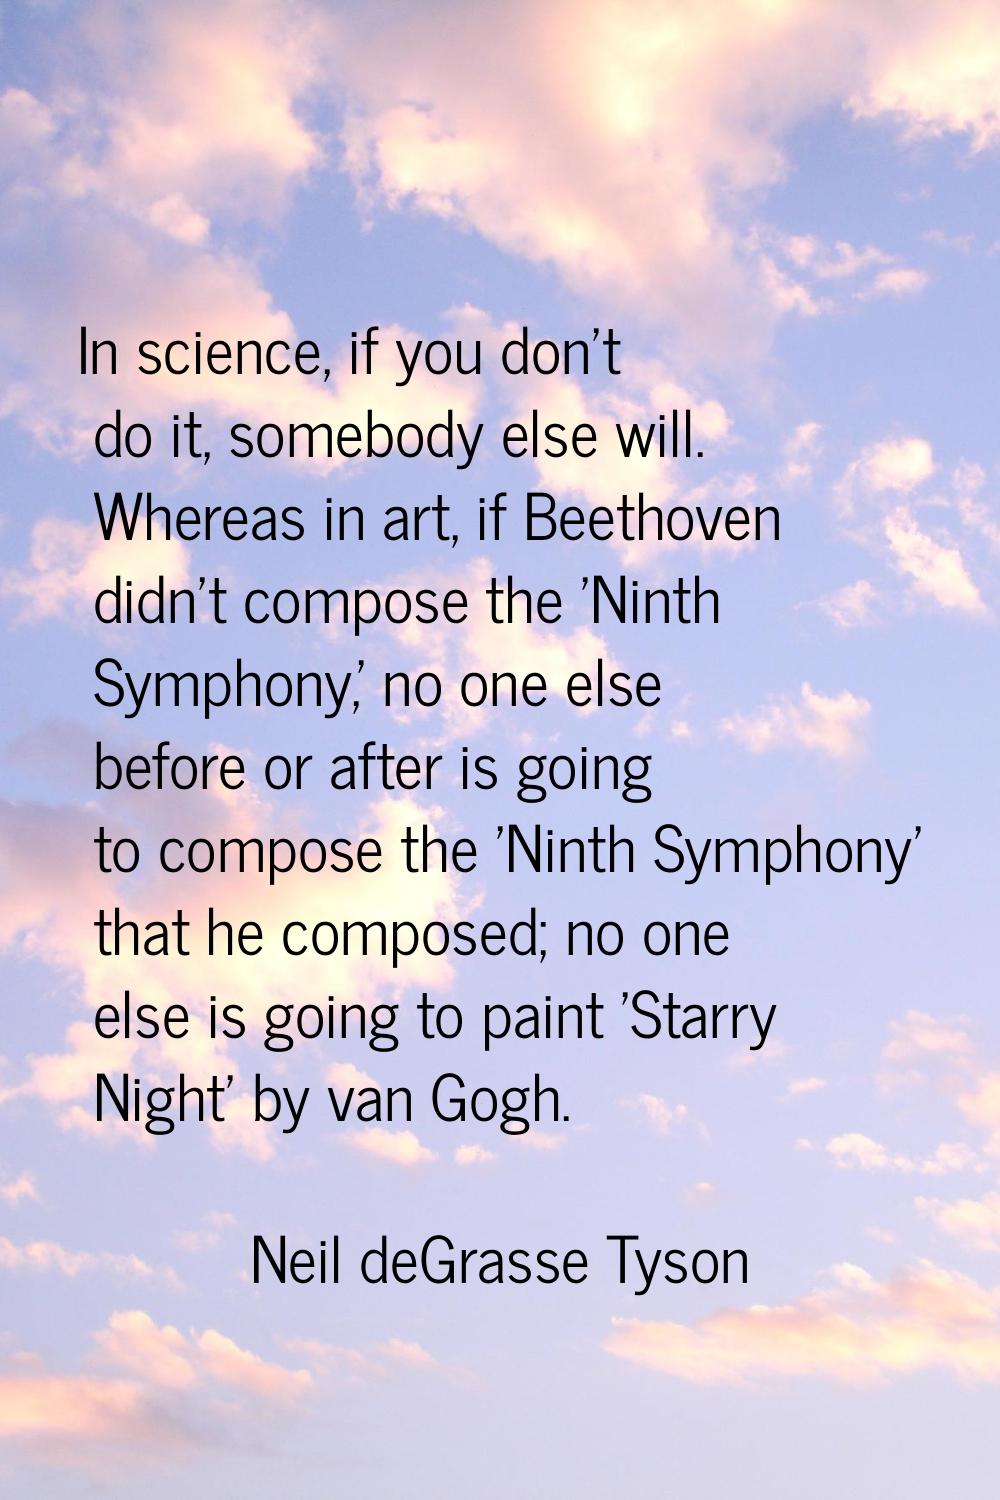 In science, if you don't do it, somebody else will. Whereas in art, if Beethoven didn't compose the